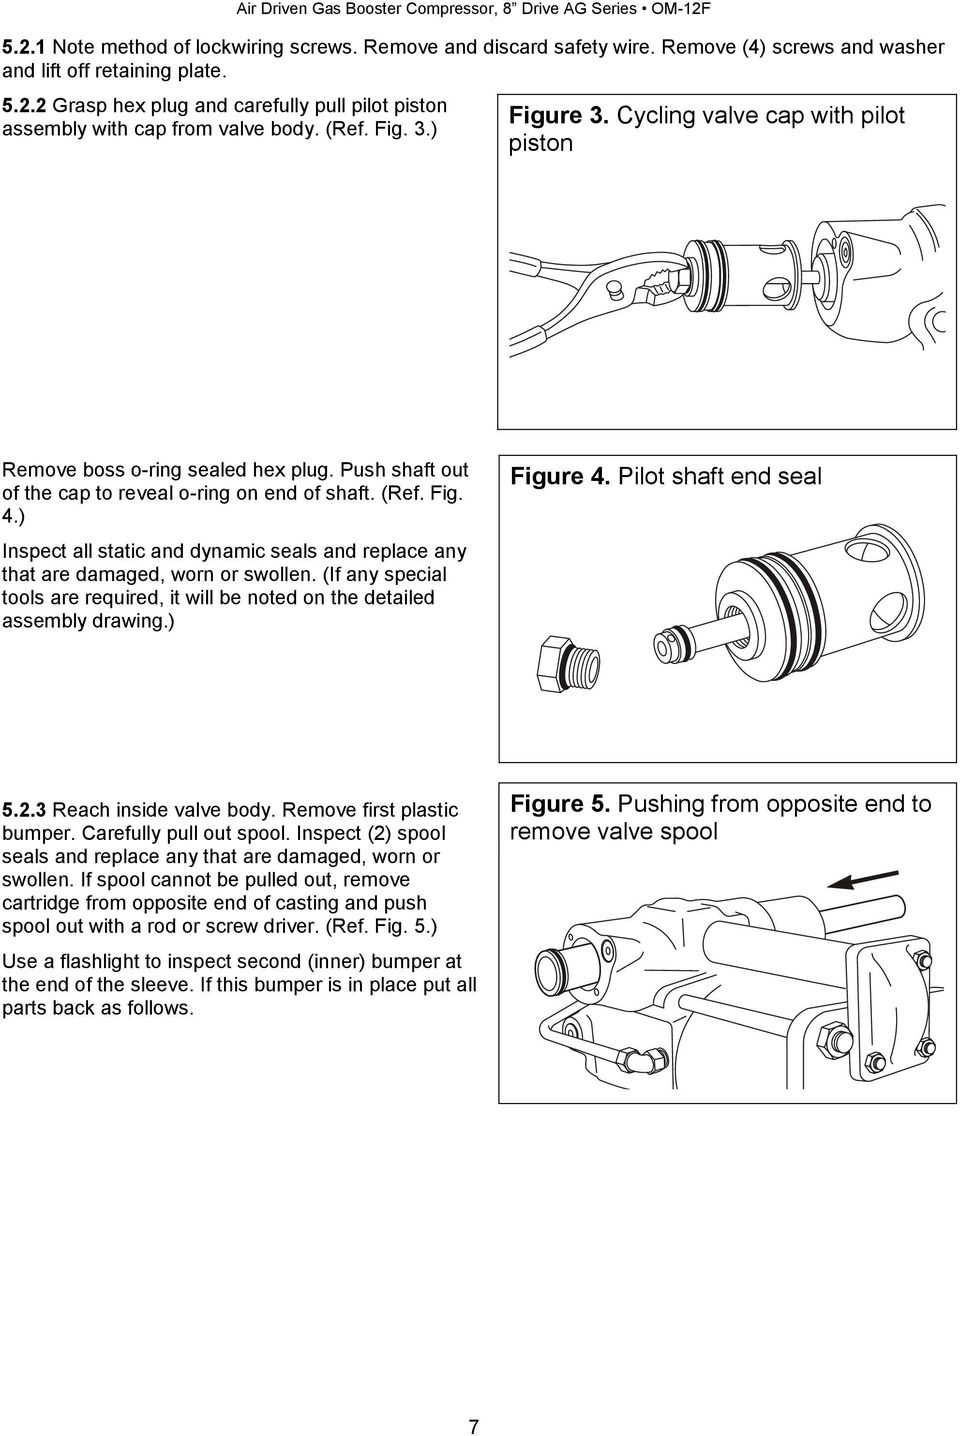 ) Inspect all static and dynamic seals and replace any that are damaged, worn or swollen. (If any special tools are required, it will be noted on the detailed assembly drawing.) Figure 4.